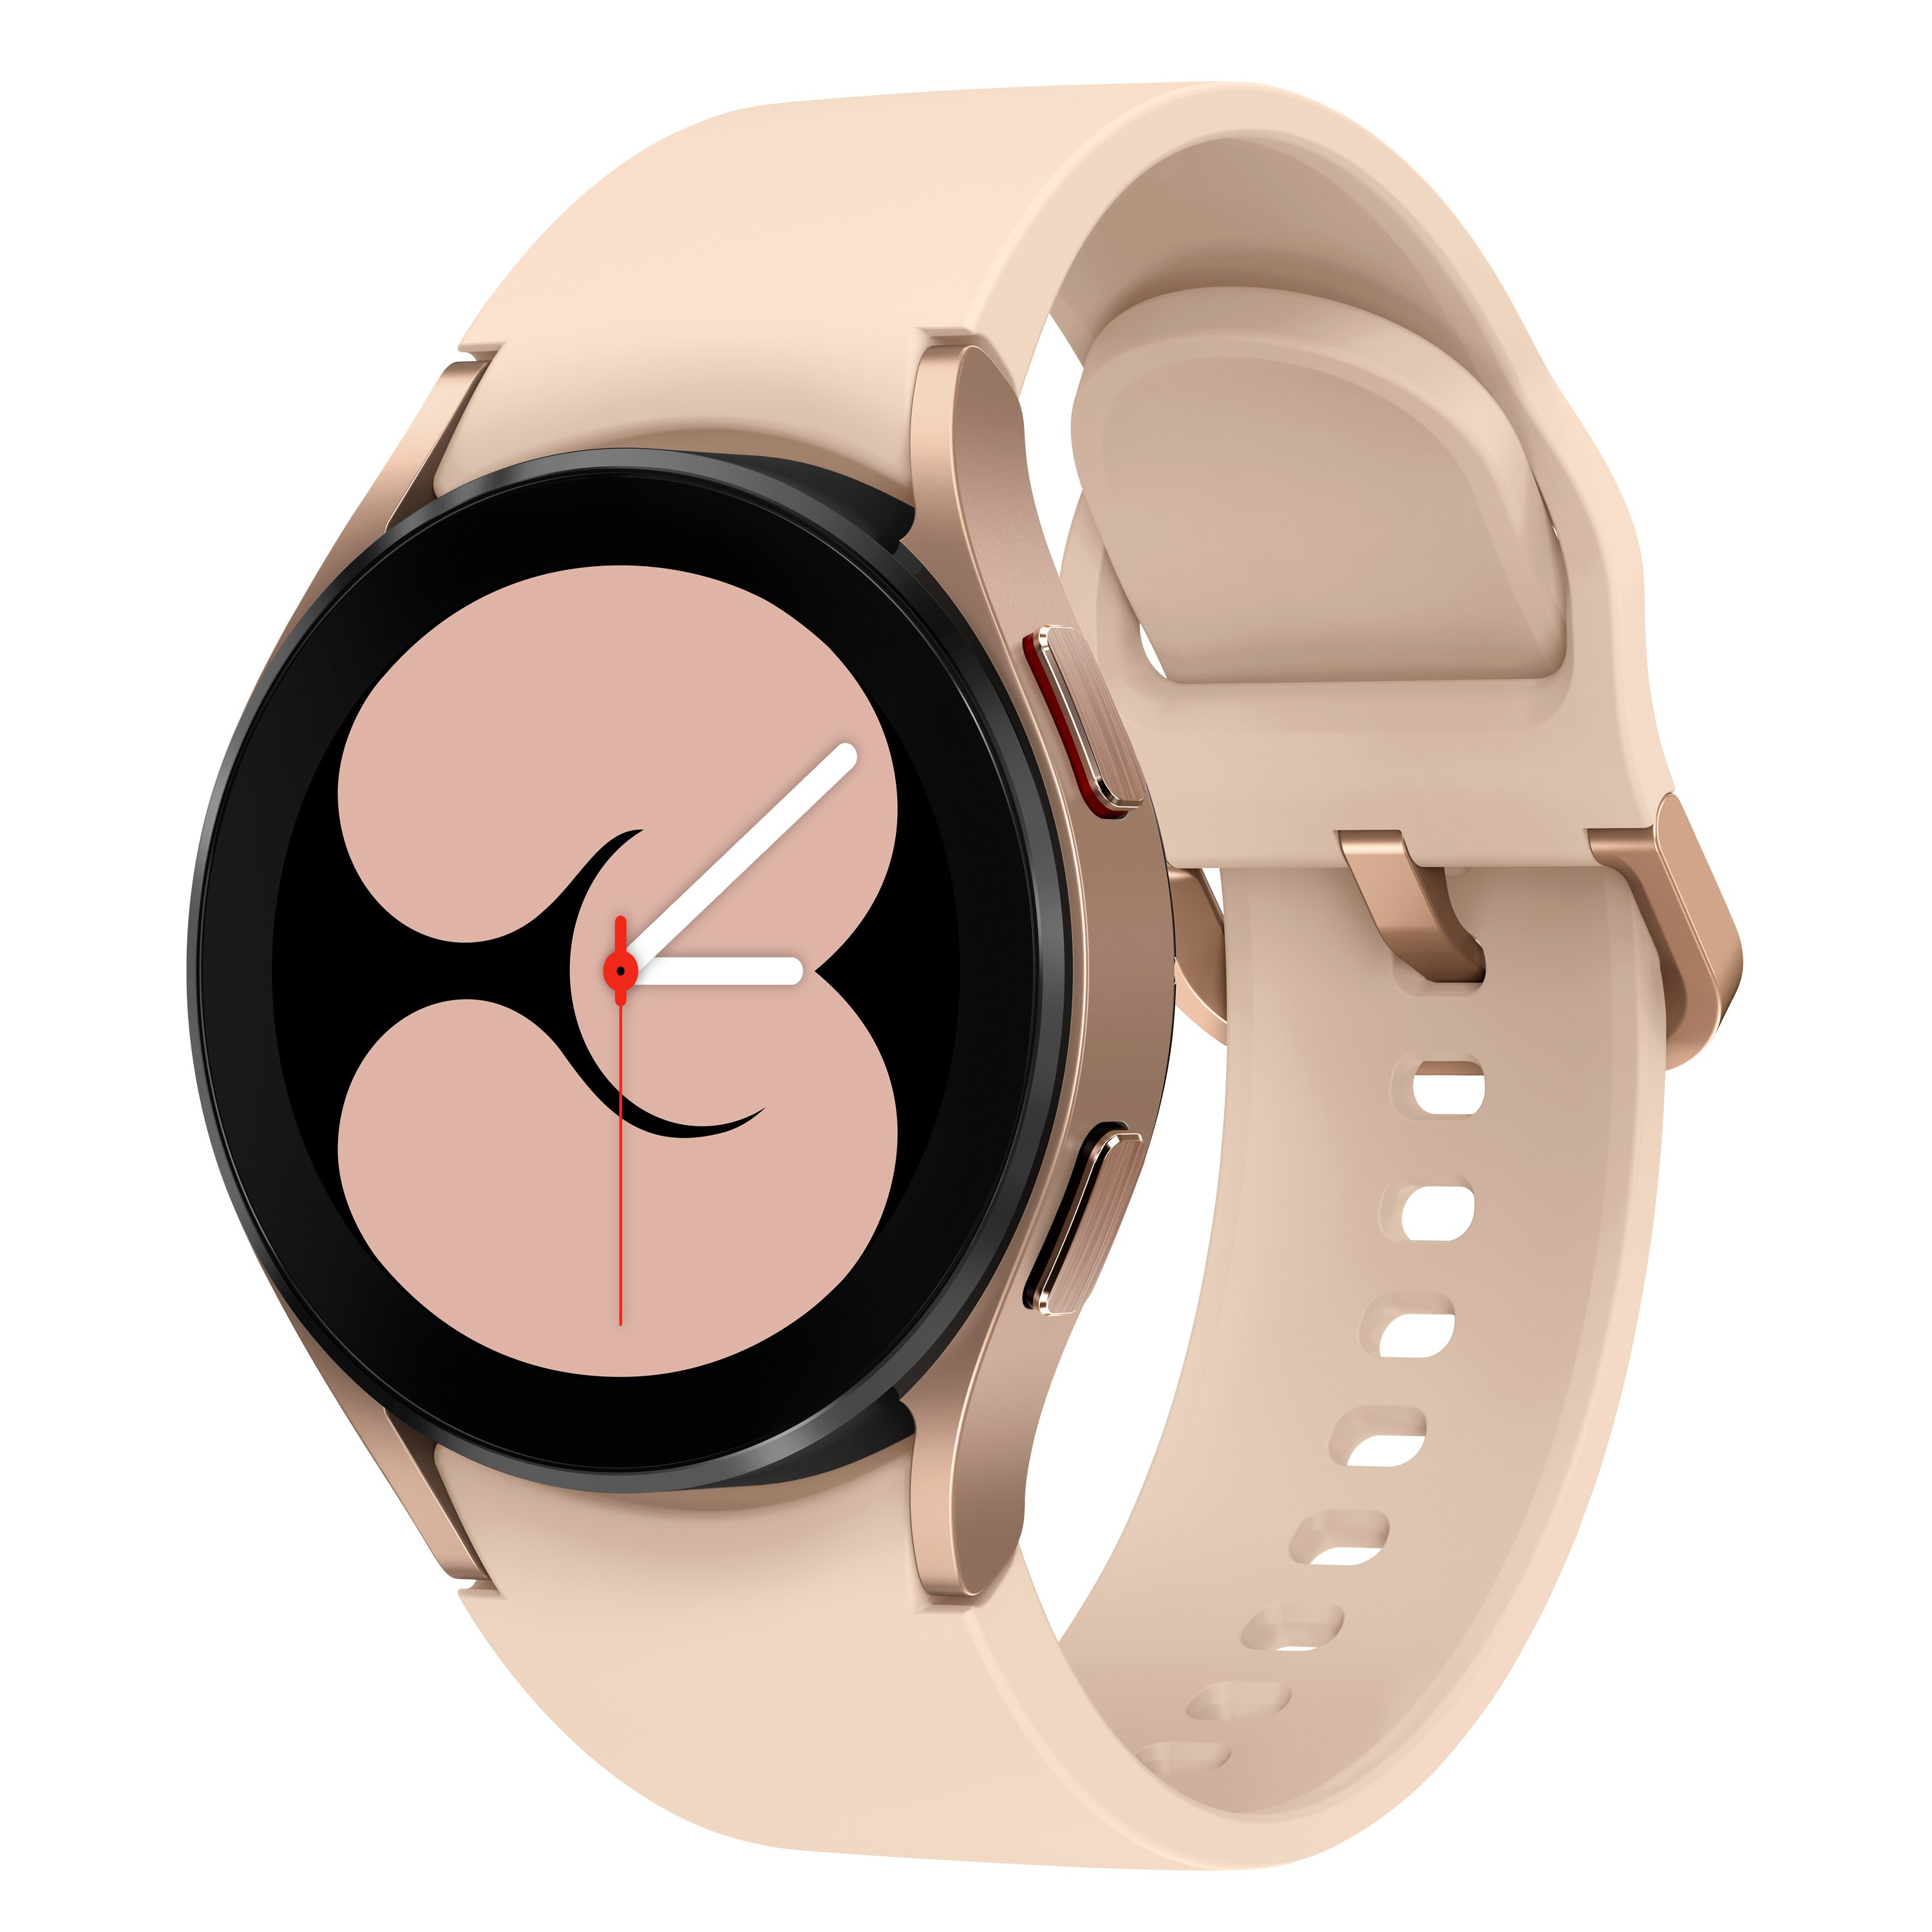 Image of Samsung Galaxy Watch4 3,05 cm (1.2") OLED 40 mm Digitale 396 x 396 Pixel Touch screen 4G Oro rosa Wi-Fi GPS (satellitare)